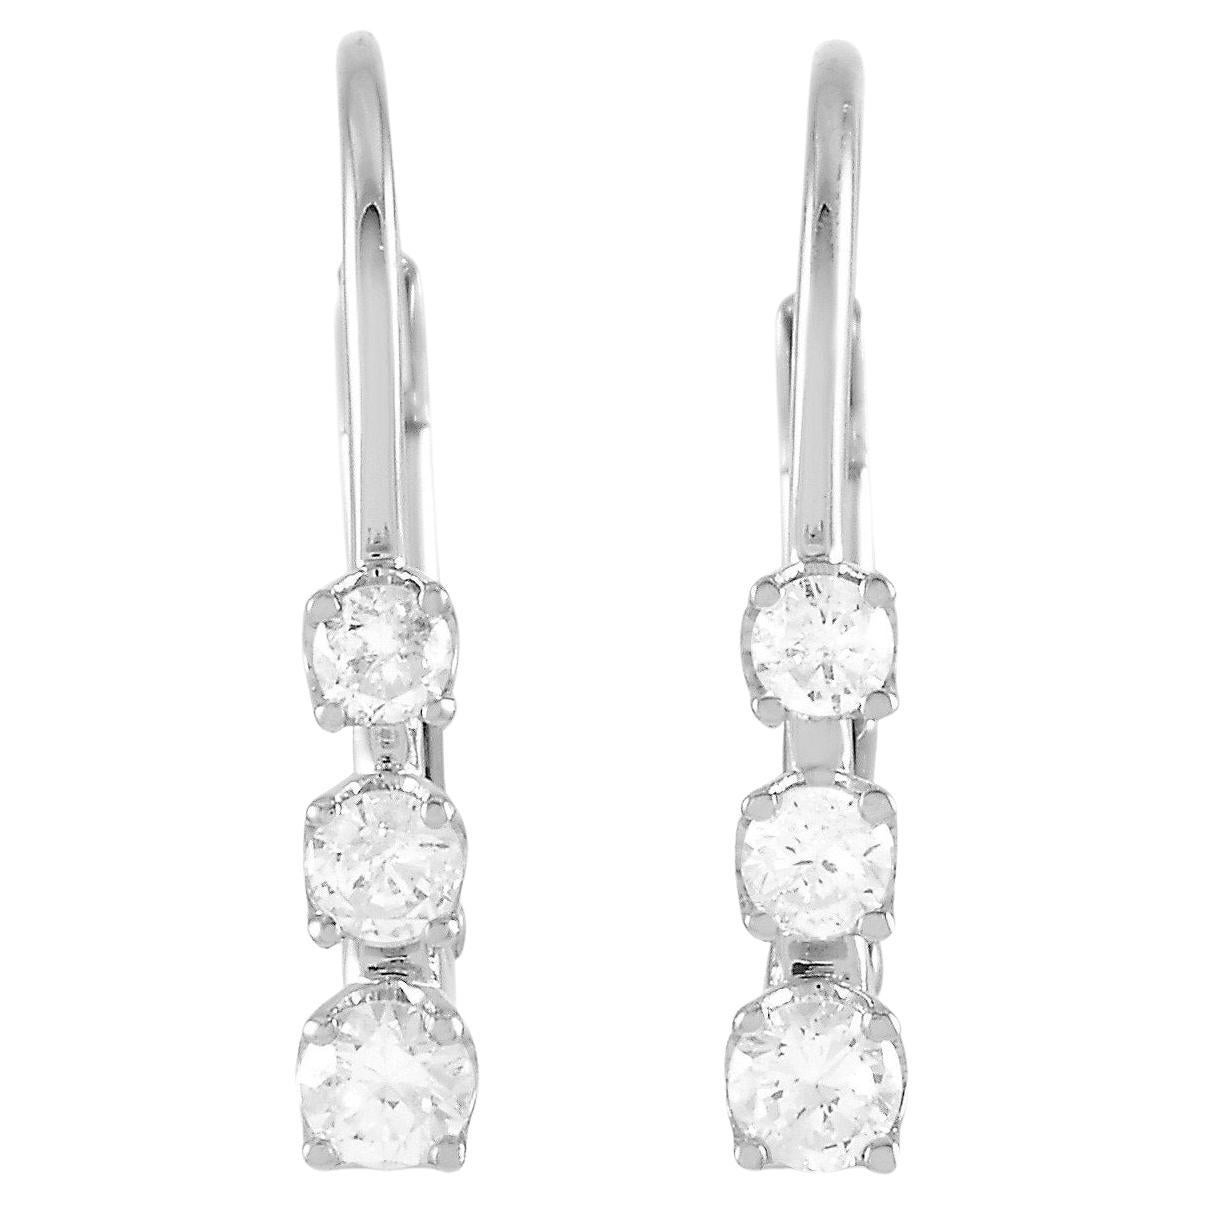 LB Exclusive 14K White Gold 0.25 Ct Diamond Earrings For Sale